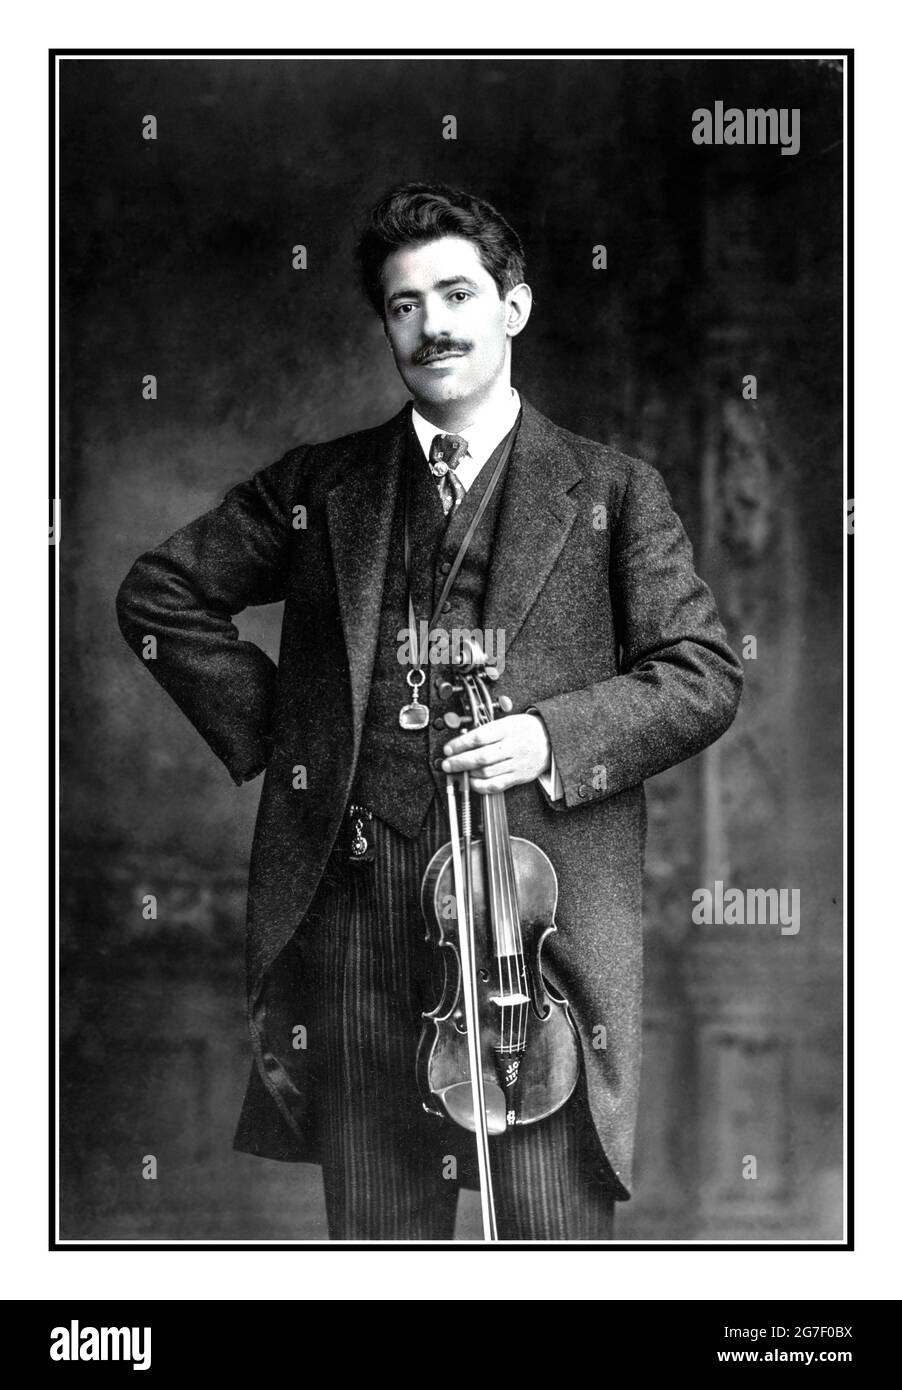 Fritz Kreisler violinist, three-quarter length portrait, standing, facing holding violin and bow Date Created/Published: c1913. Kreisler, Fritz, 1875-1962 Fritz Kreisler (February 2, 1875 – January 29, 1962) was an Austrian-born American violinist and composer. One of the most noted violin masters of his day, and regarded as one of the greatest violinists of all time, he was known for his sweet tone and expressive phrasing. Like many great violinists of his generation, he produced a characteristic sound which was immediately recognizable as his own. Stock Photo